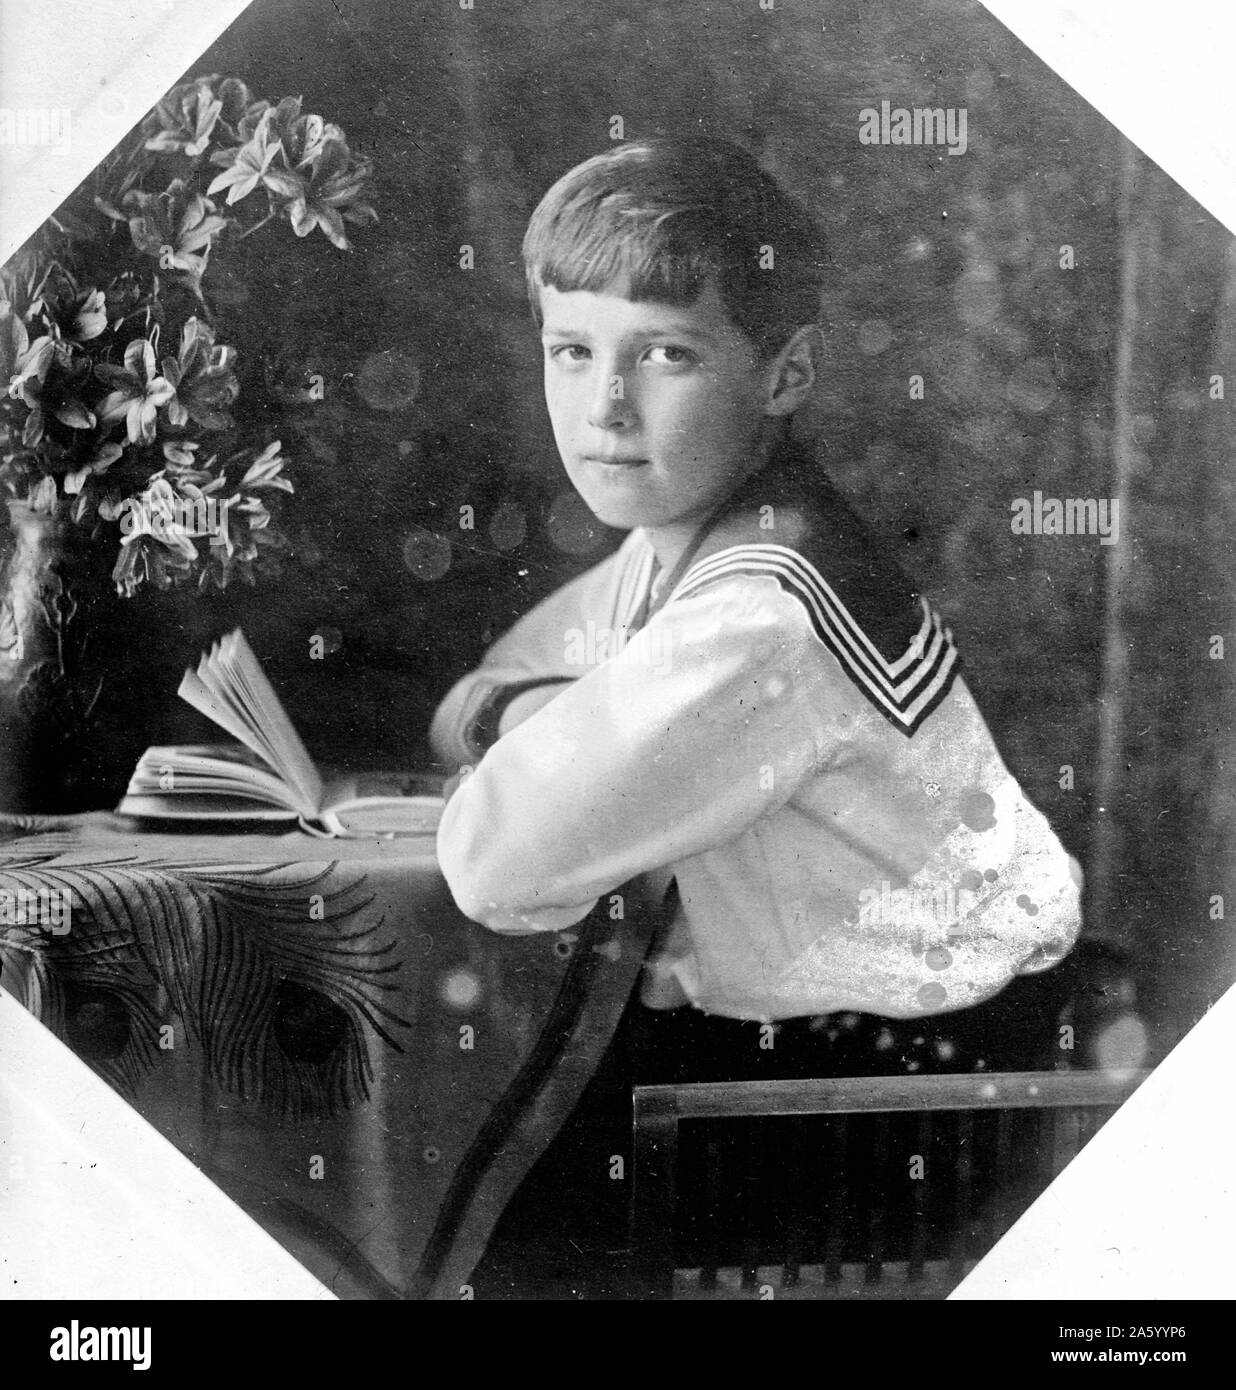 Photograph of Tsarevich Alexei Romanov (1904-1918) heir apparent to the throne of the Russian Empire. He was the youngest child and only son of Emperor Nicholas II and Empress Alexandra Feodorovna. Dated 1910 Stock Photo